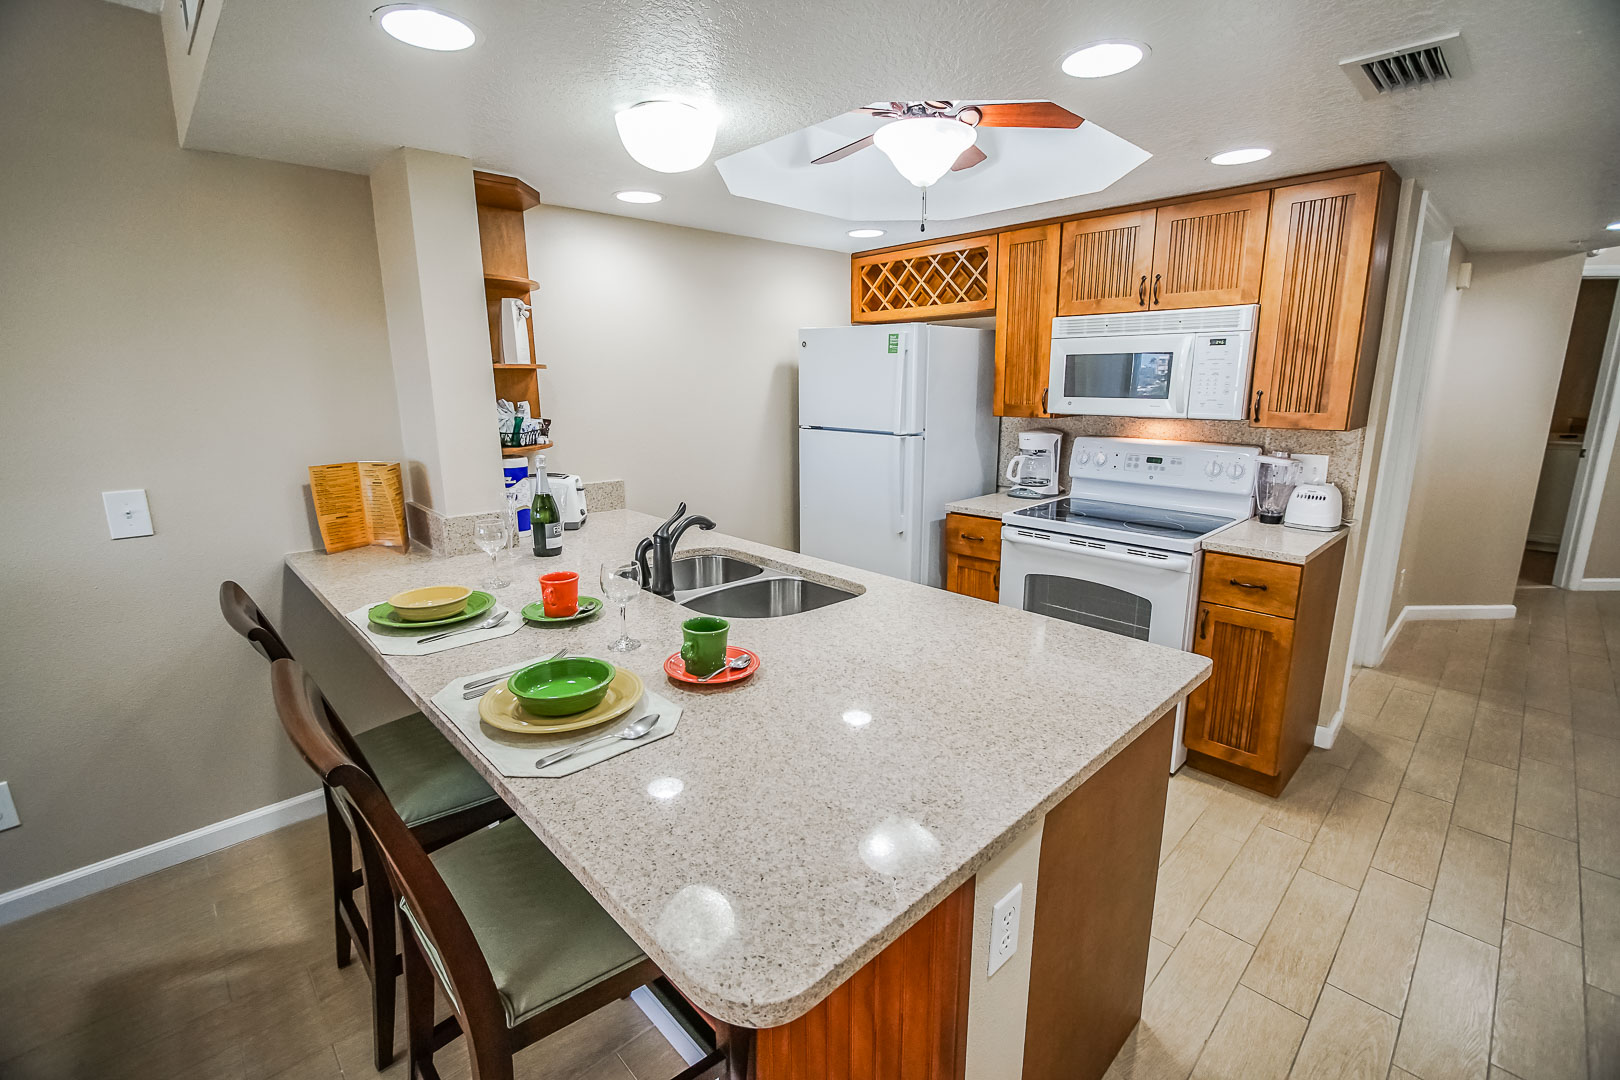 A standard kitchen at VRI's The Resort on Cocoa Beach in Florida.